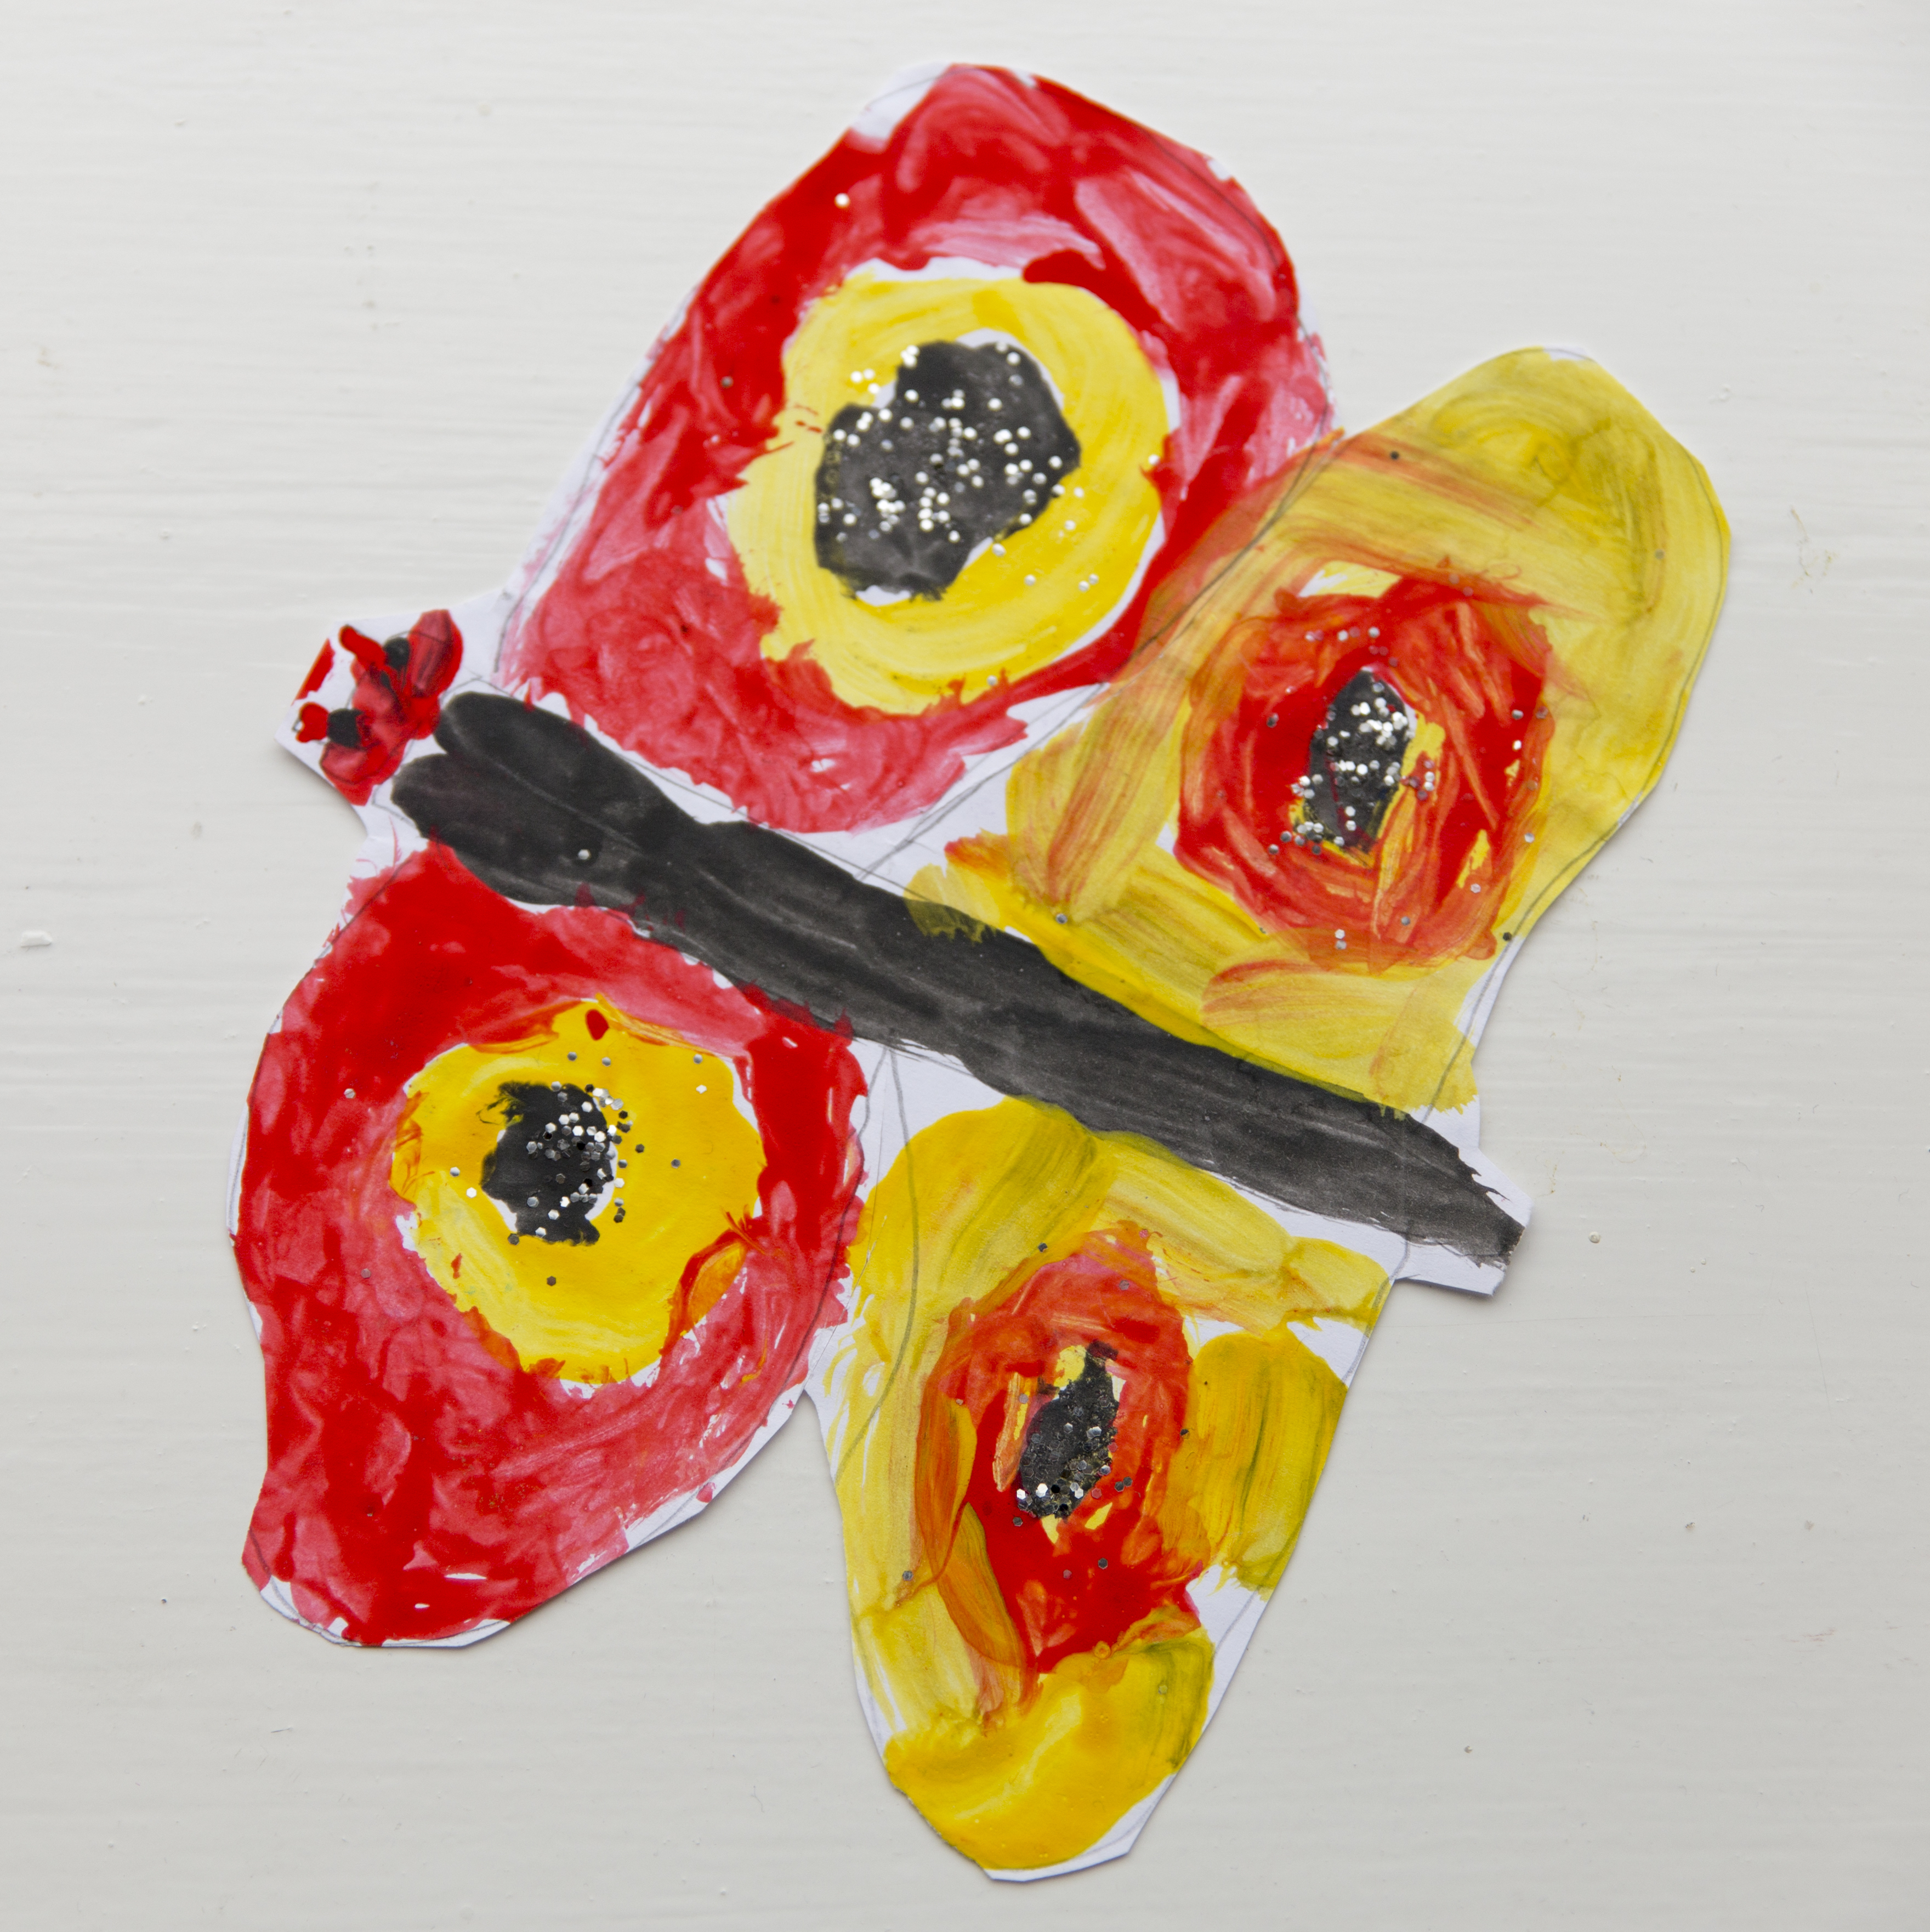 Child's finger painting of a butterfly using red, yellow and black paint